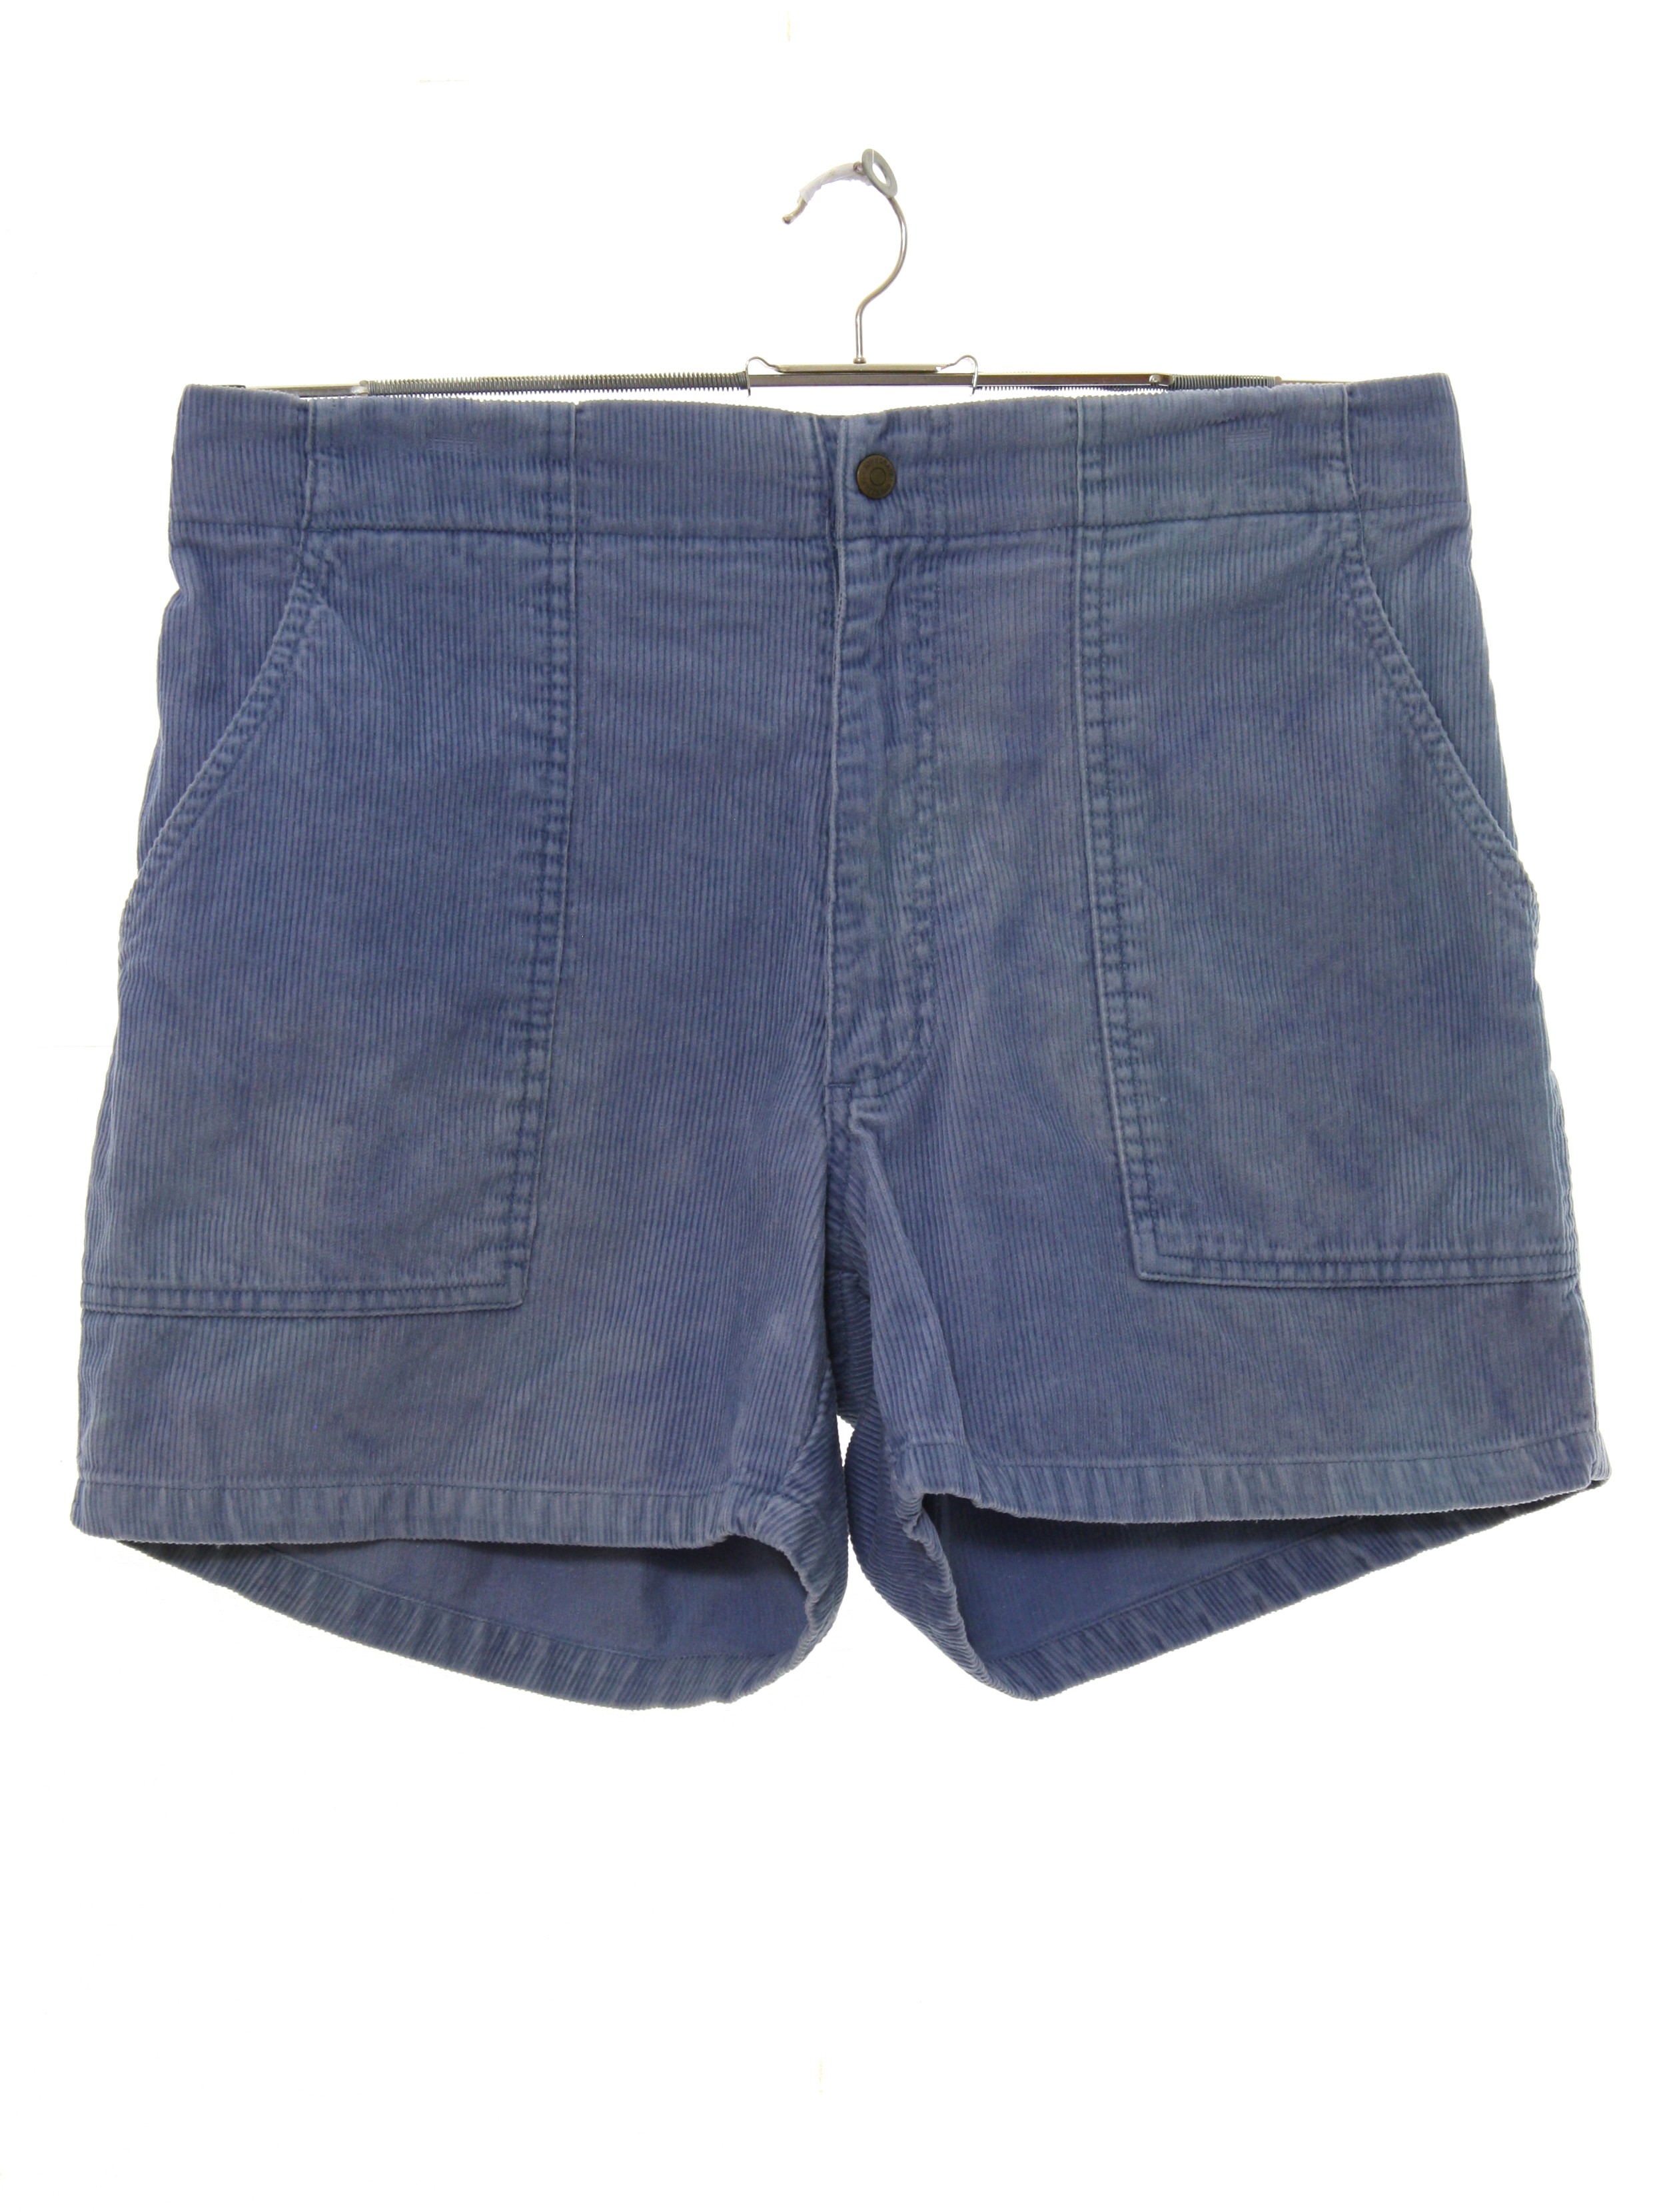 Towncraft 80's Vintage Shorts: 80s -Towncraft- Mens dusty blue ...